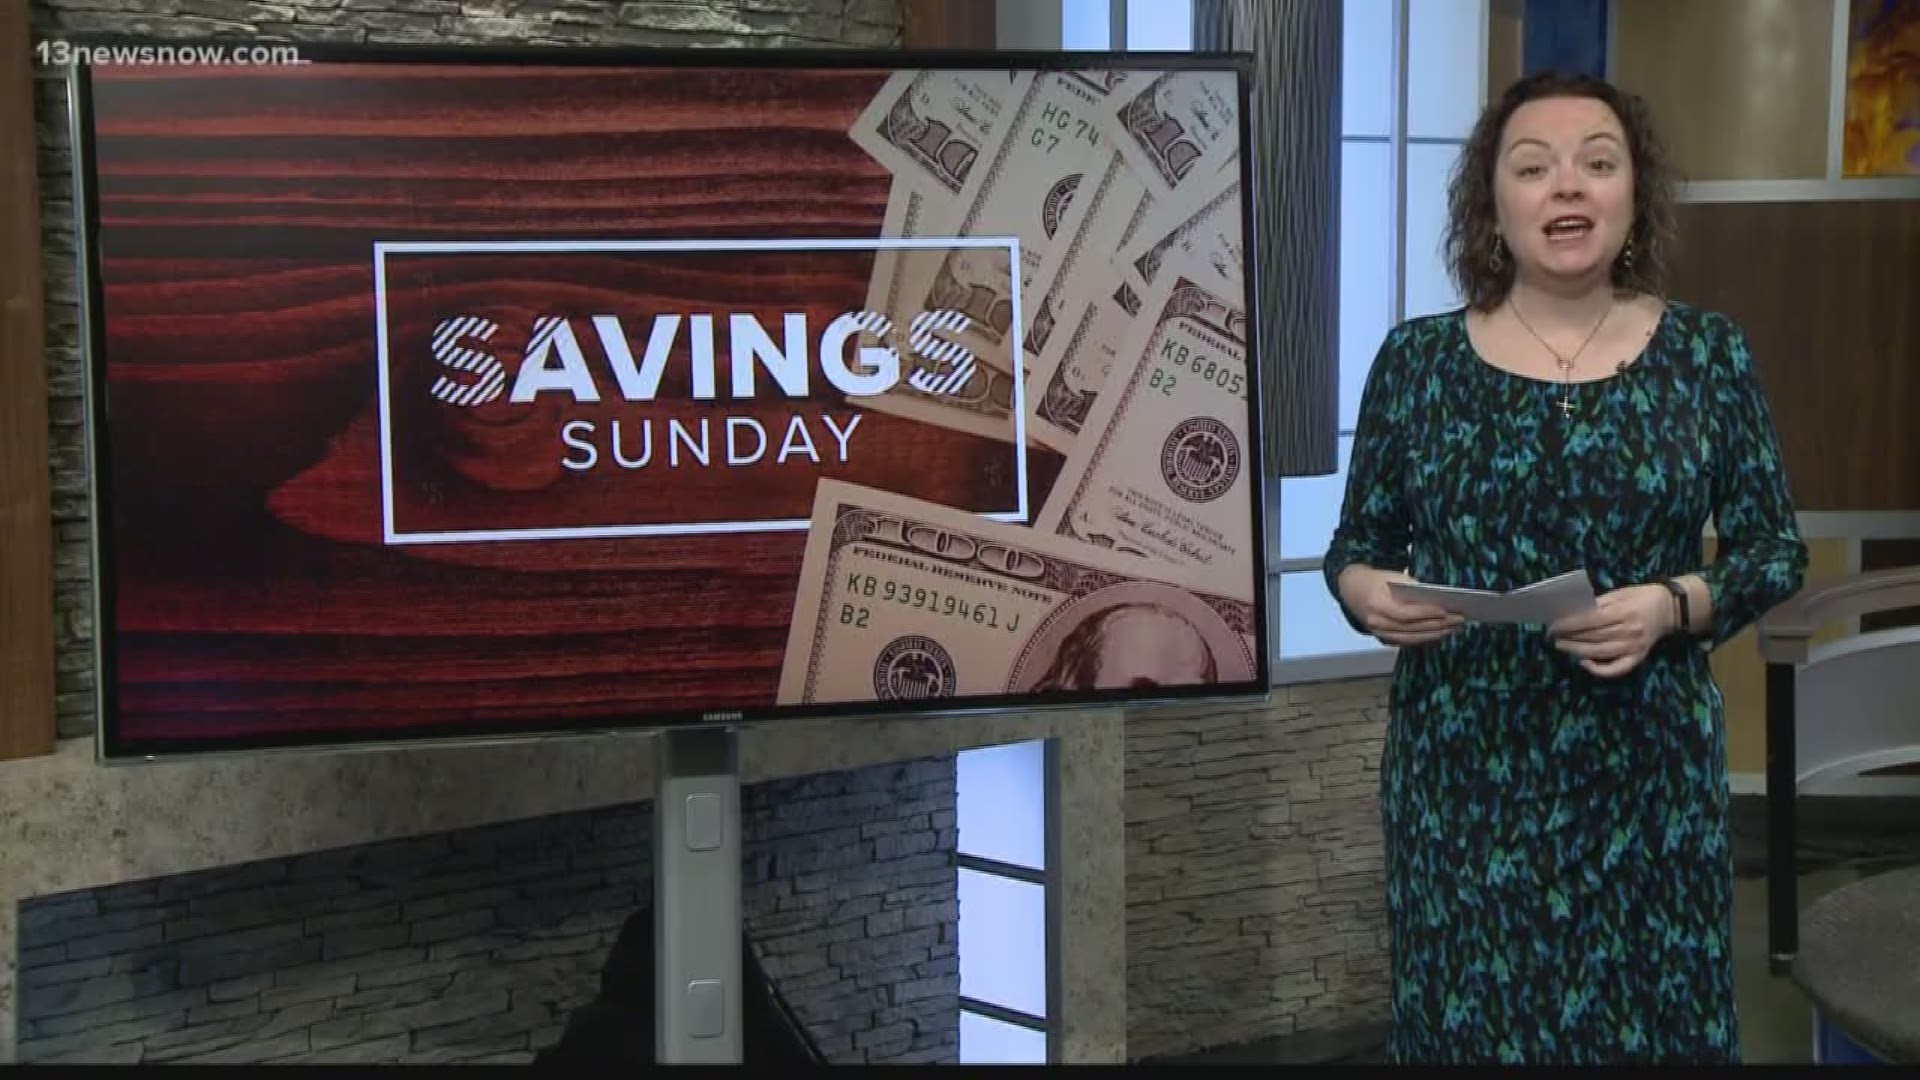 Laura Oliver from afrugralchick.com has your big savings for the week of April 8, 2018.